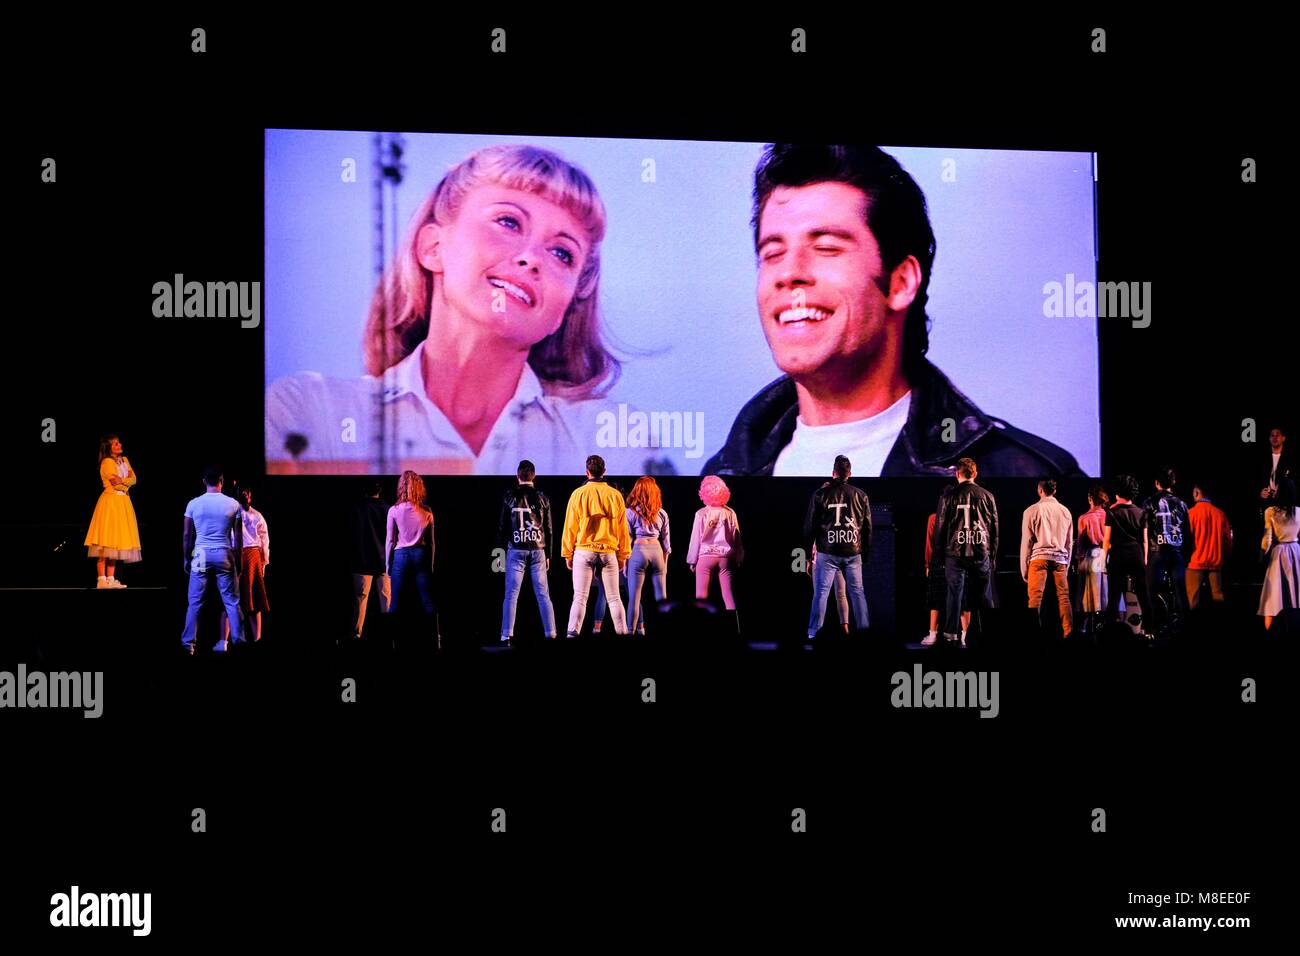 Yas Outdoor Park, Yas Island, Abu Dhabi, UAE -16th March, 2018: Gateway Park is Holding a Free Outdoor Cinema Presenting a Musical Movie 'Grease' by Paramount Channel. Credit: Fahd Khan/Alamy Live News Stock Photo